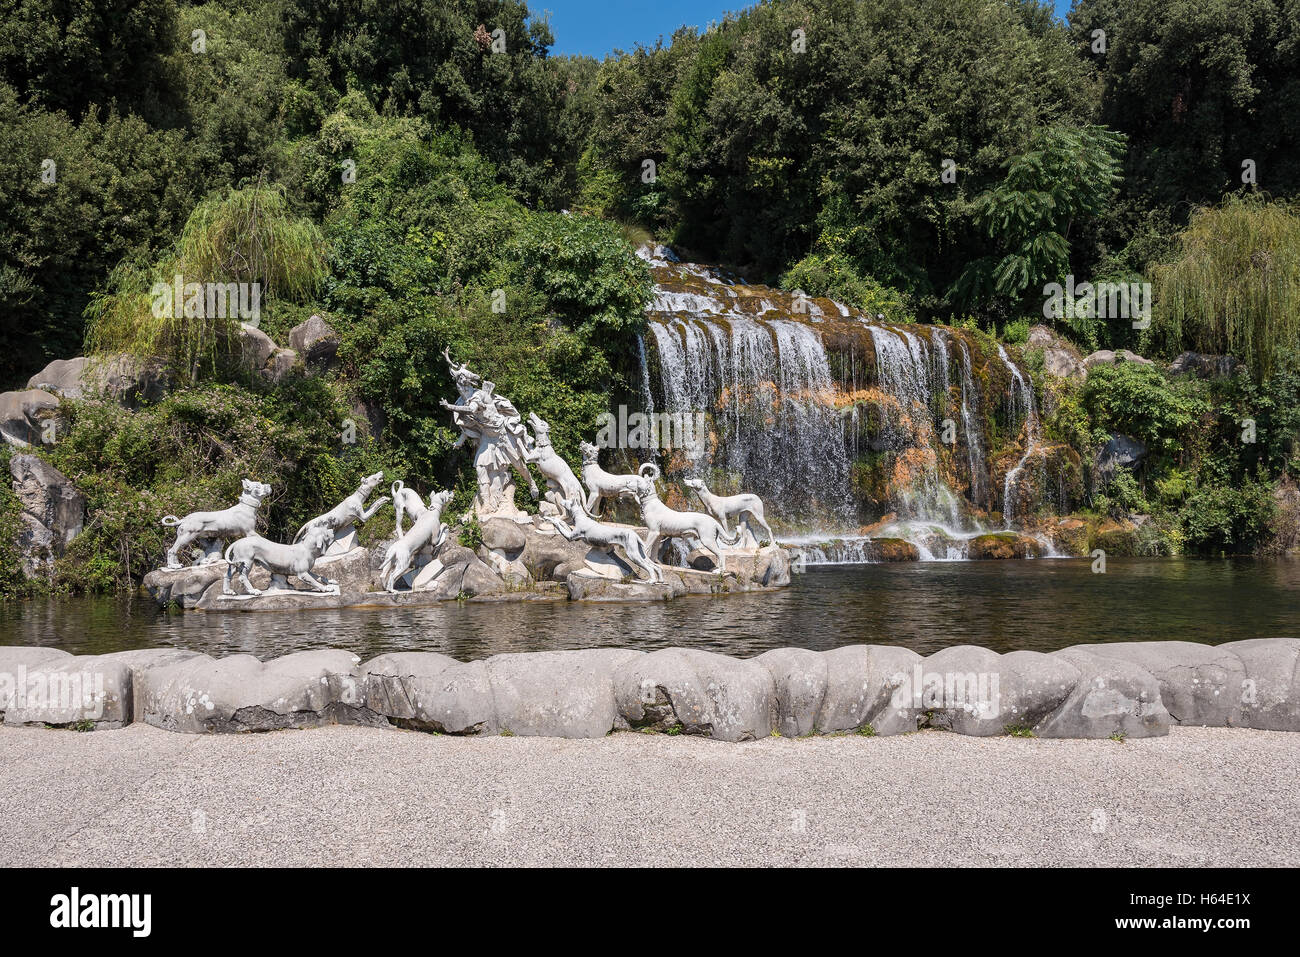 The Diana and Actaeon Fountain at the feet of the Grand Cascade in the garden of Caserta Royal Palace, Italy Stock Photo